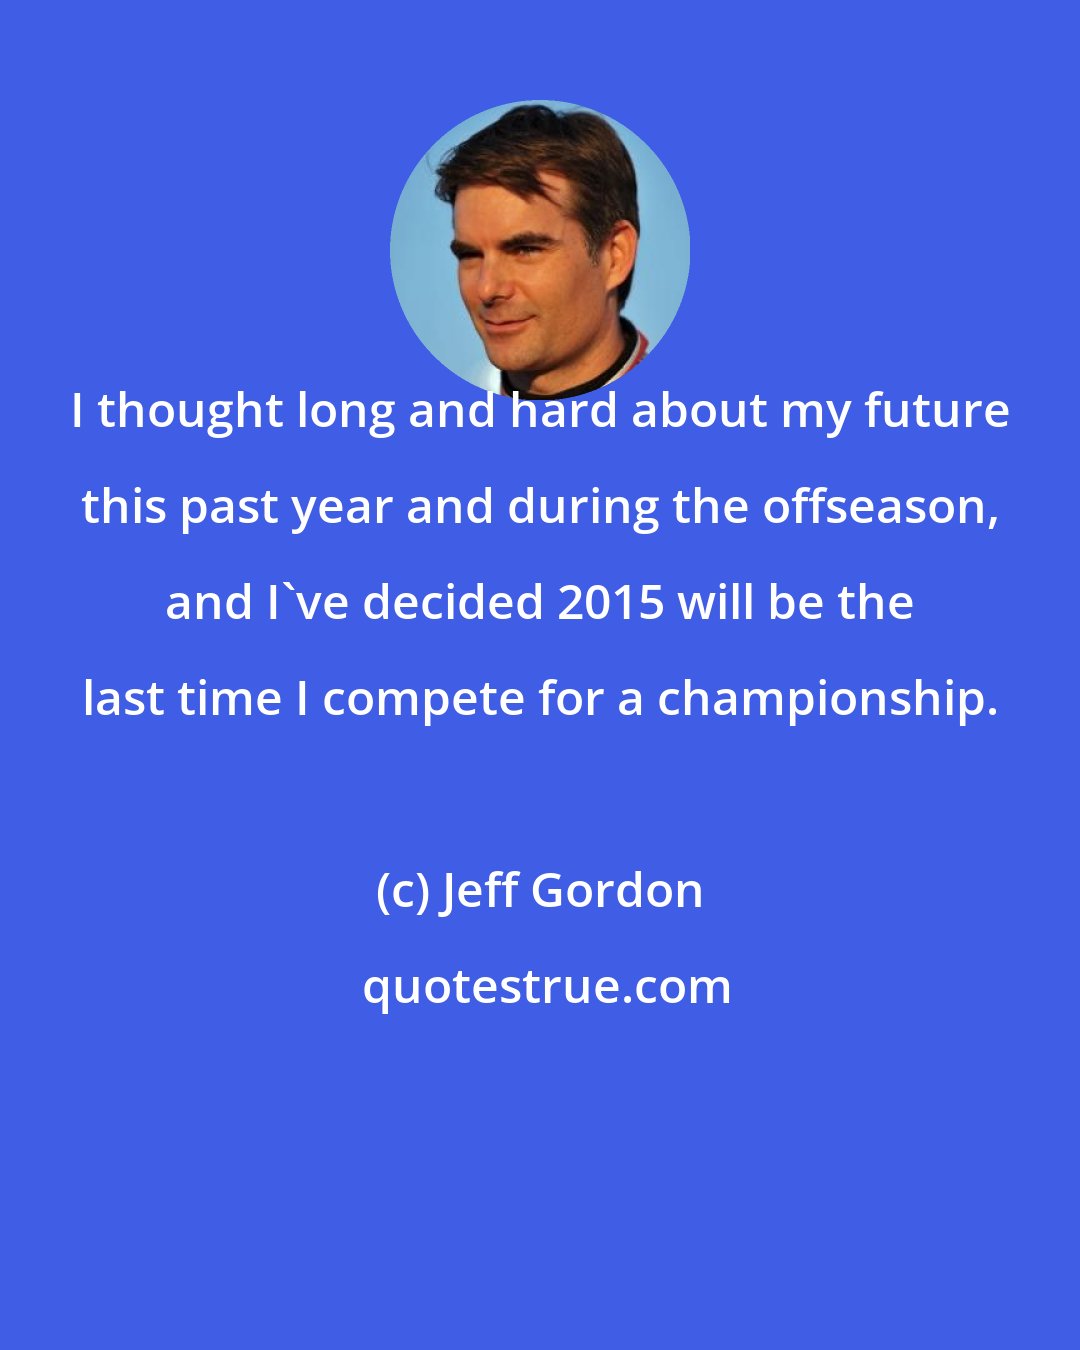 Jeff Gordon: I thought long and hard about my future this past year and during the offseason, and I've decided 2015 will be the last time I compete for a championship.